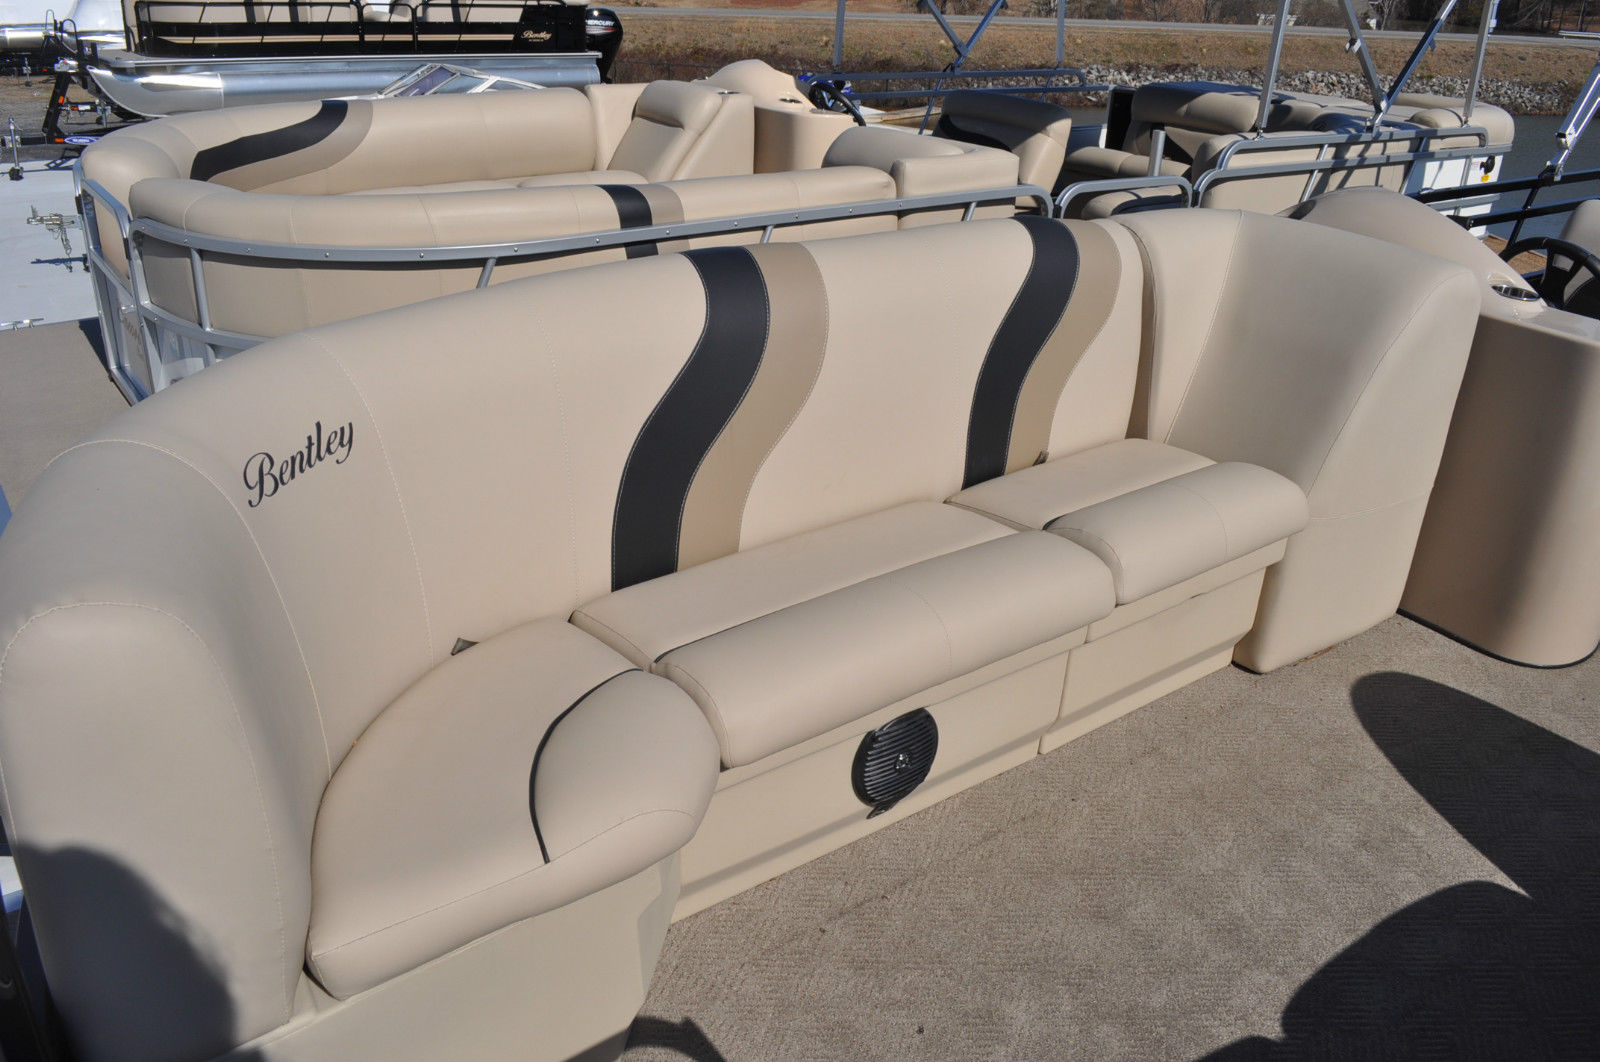 Encore Boat Builders Bentley Cruise 243 boat for sale from USA